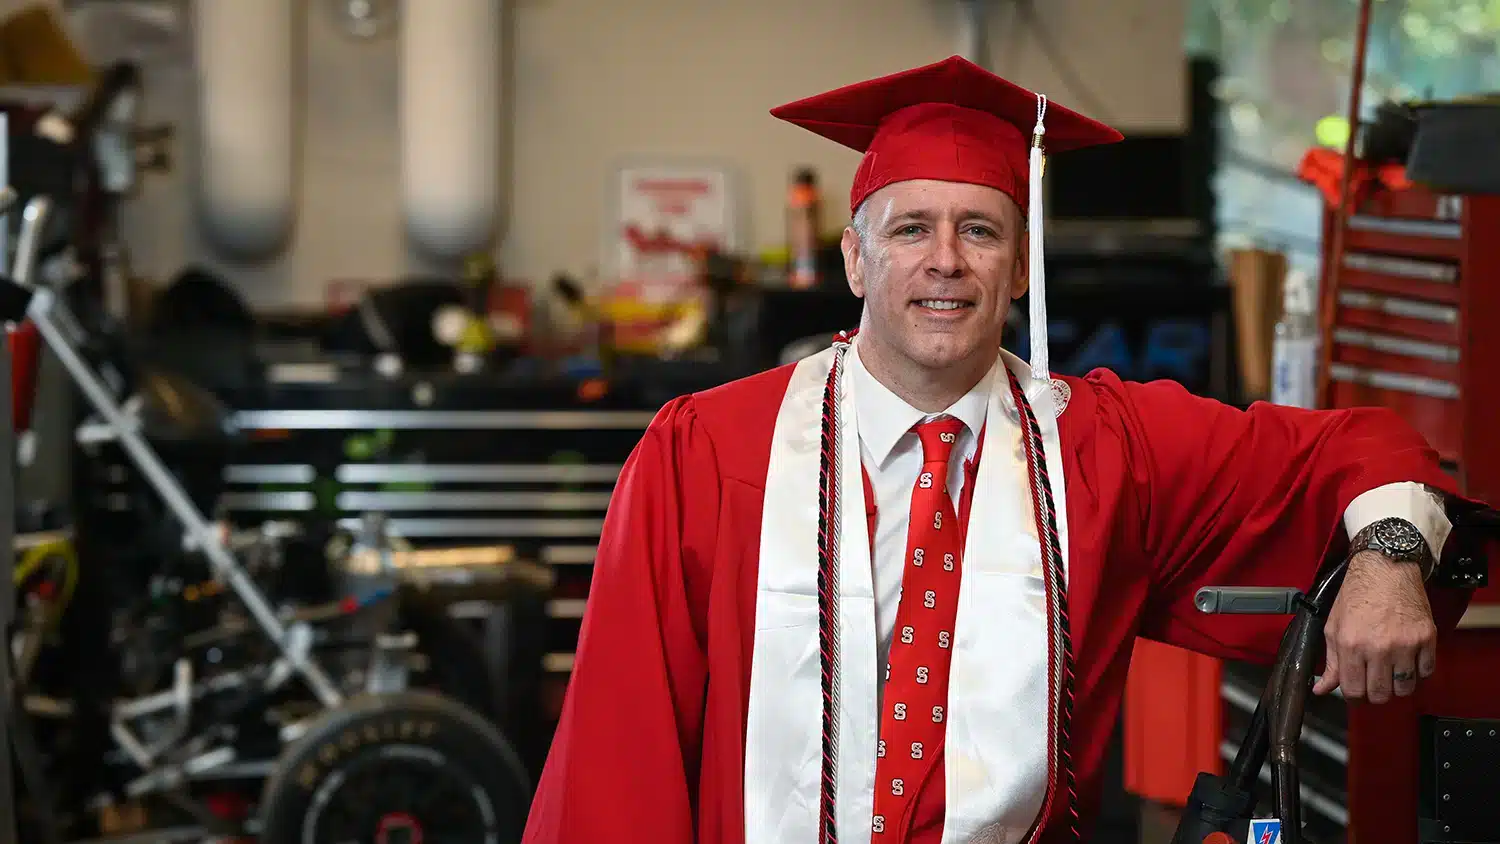 New graduate Isaac Mayle stands in the Pack Motorsports workshop in his red cap and gown.